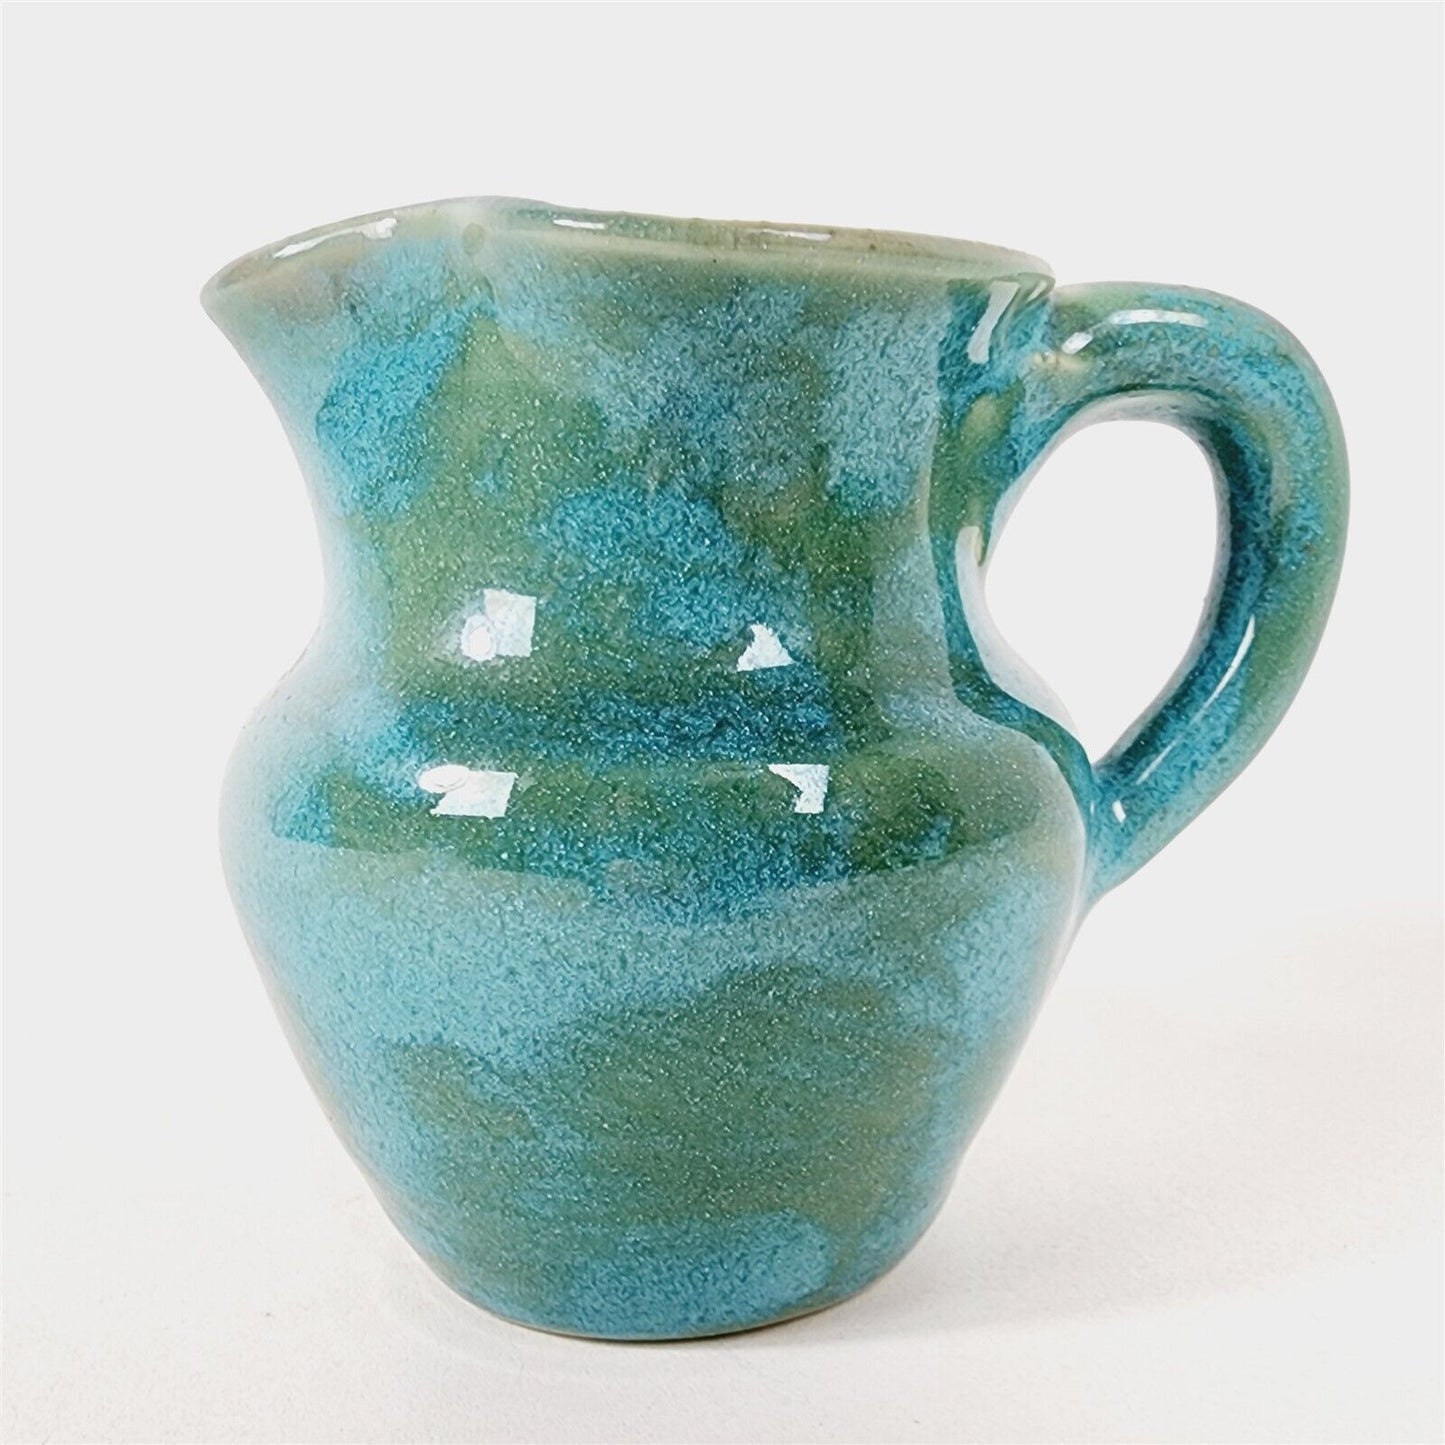 Vintage Pisgah Forest Pottery Pitcher Creamer Blue Green Pink Inside - 4" tall